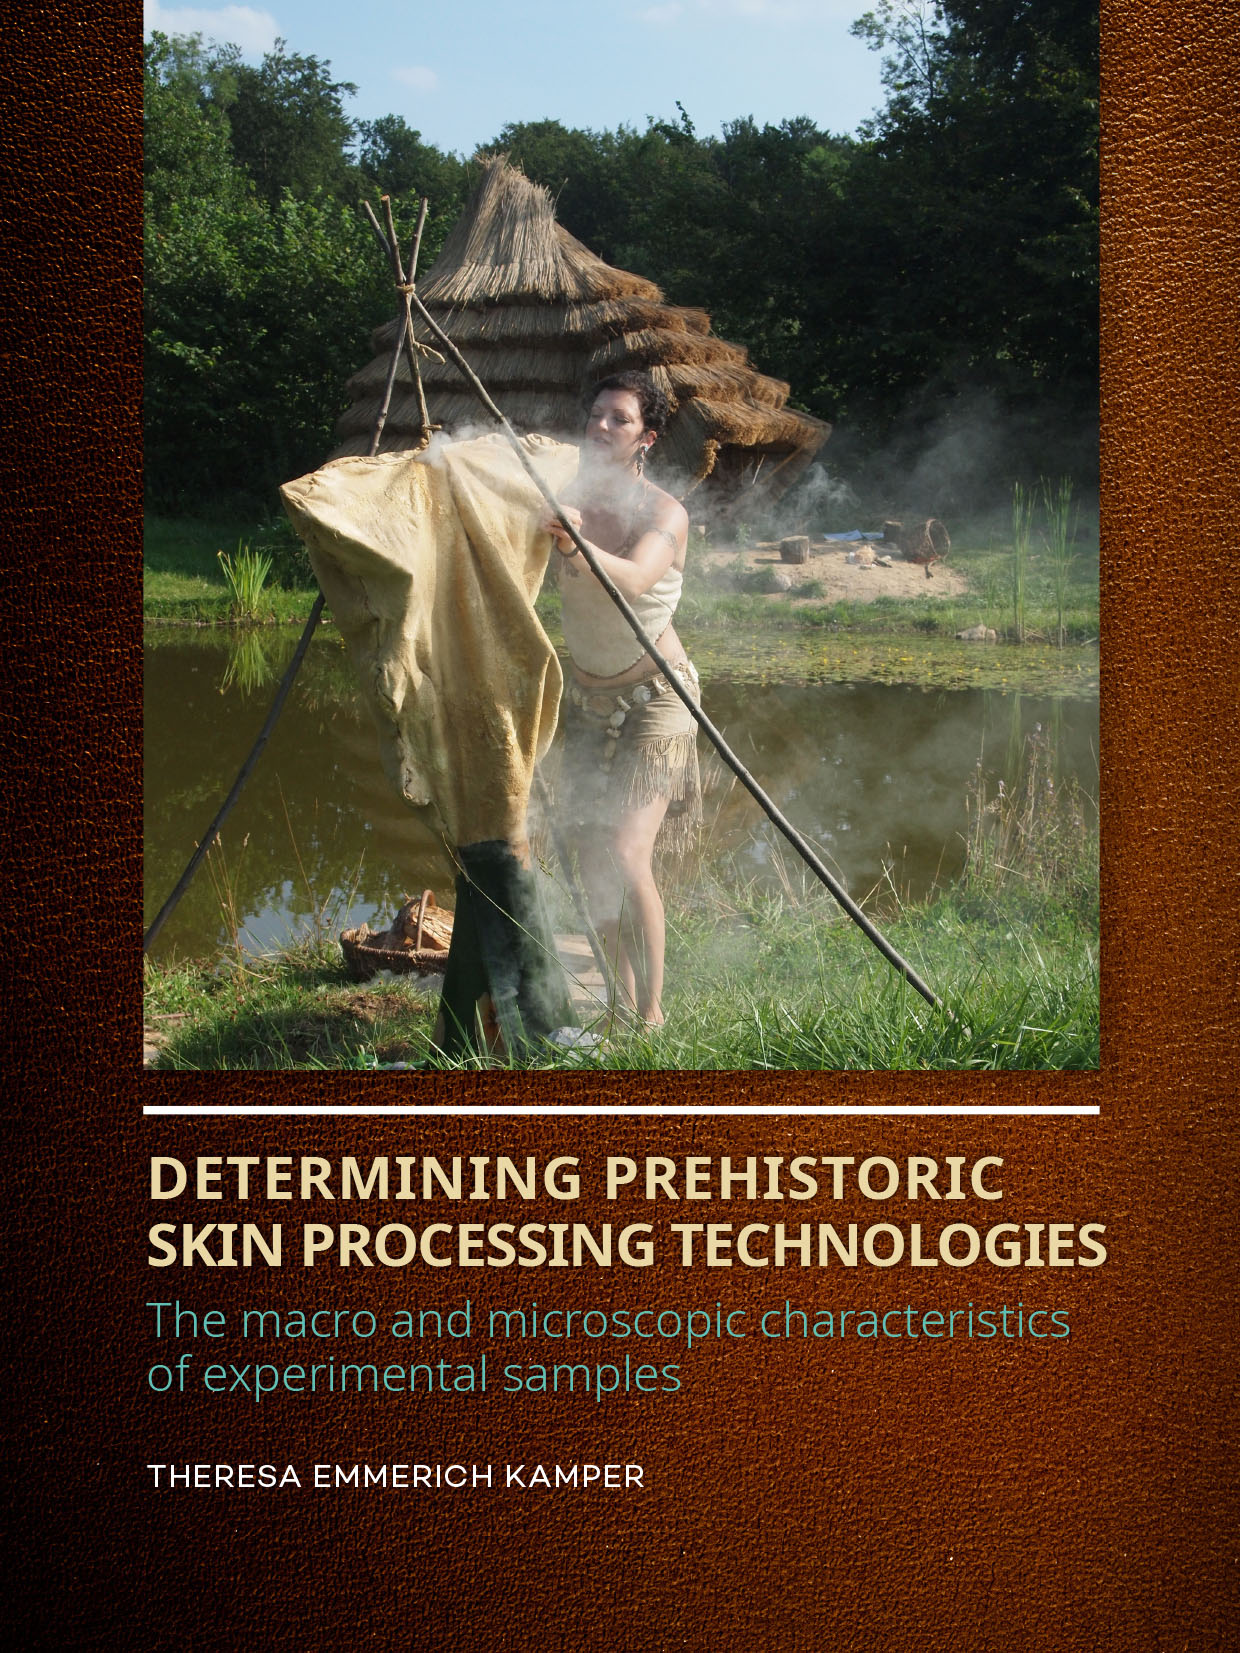 Determining Prehistoric Skin Processing Technologies. The macro and microscopic characteristics of experimental samples, 2020, 250 p.